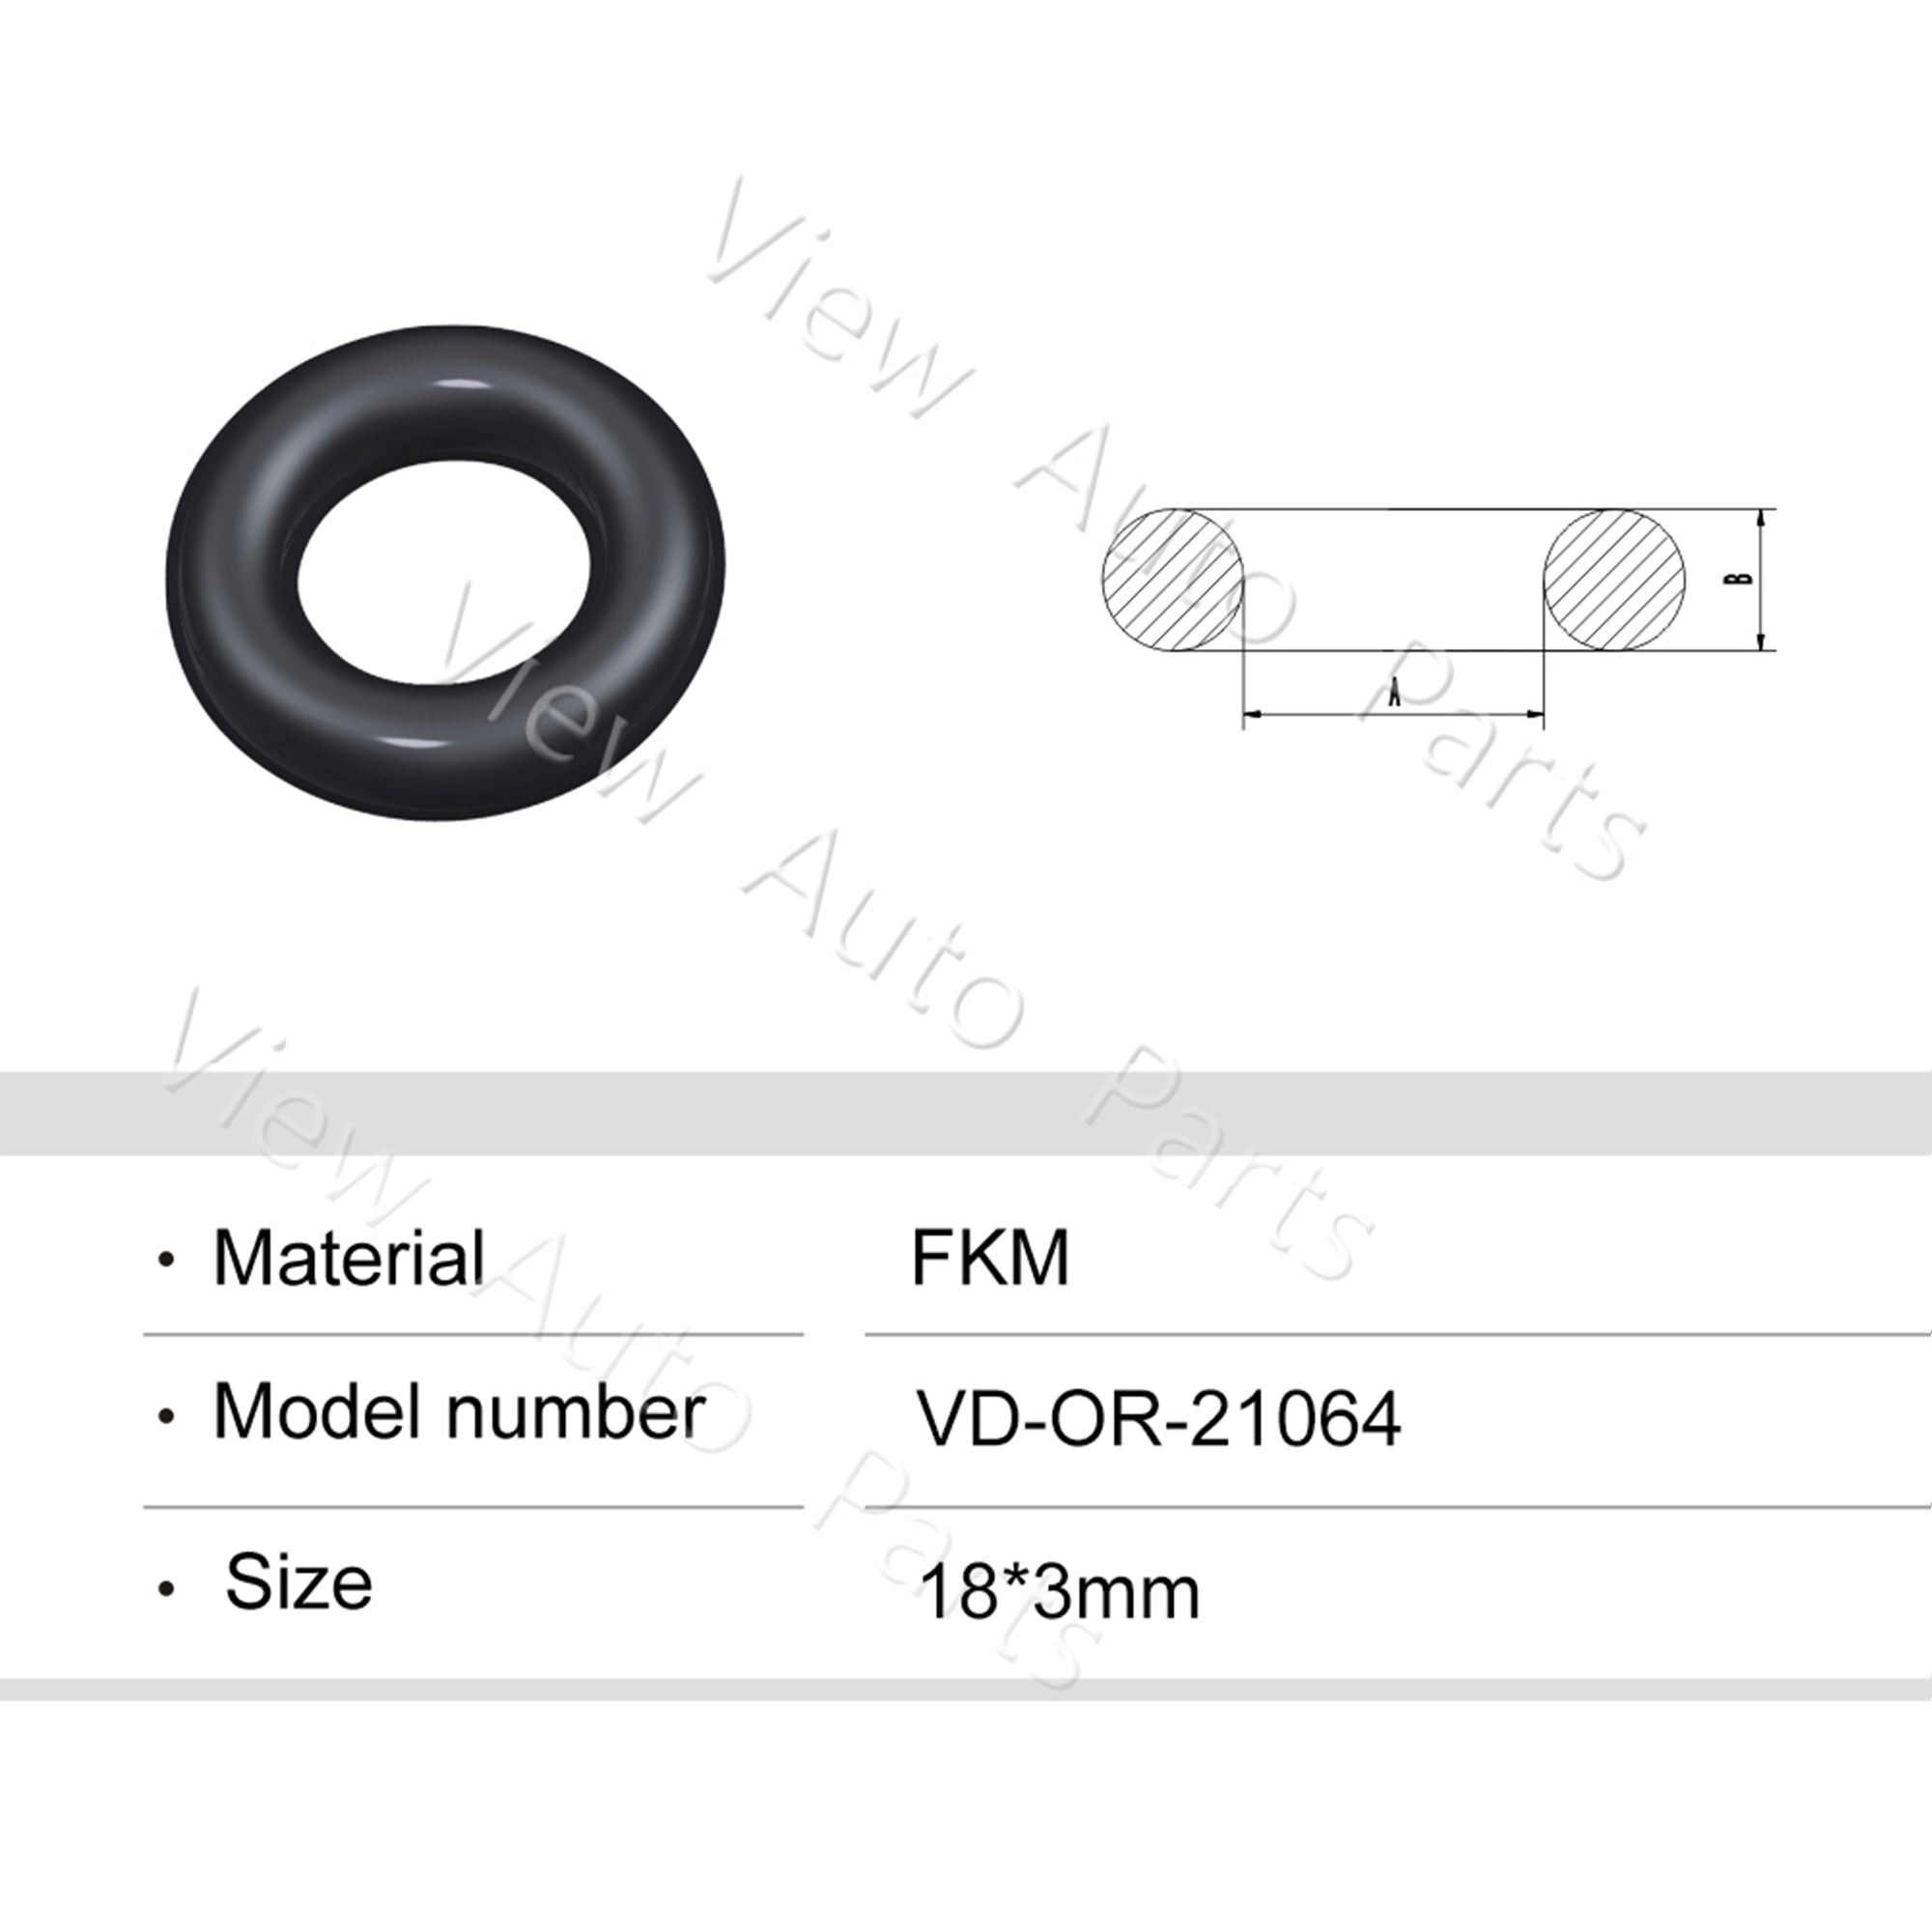 Fuel Injector Rubber Seal Orings for Fuel Injector Repair Kits FKM & Rubber Heat Resistant, Size: 18*3mm OR-21064